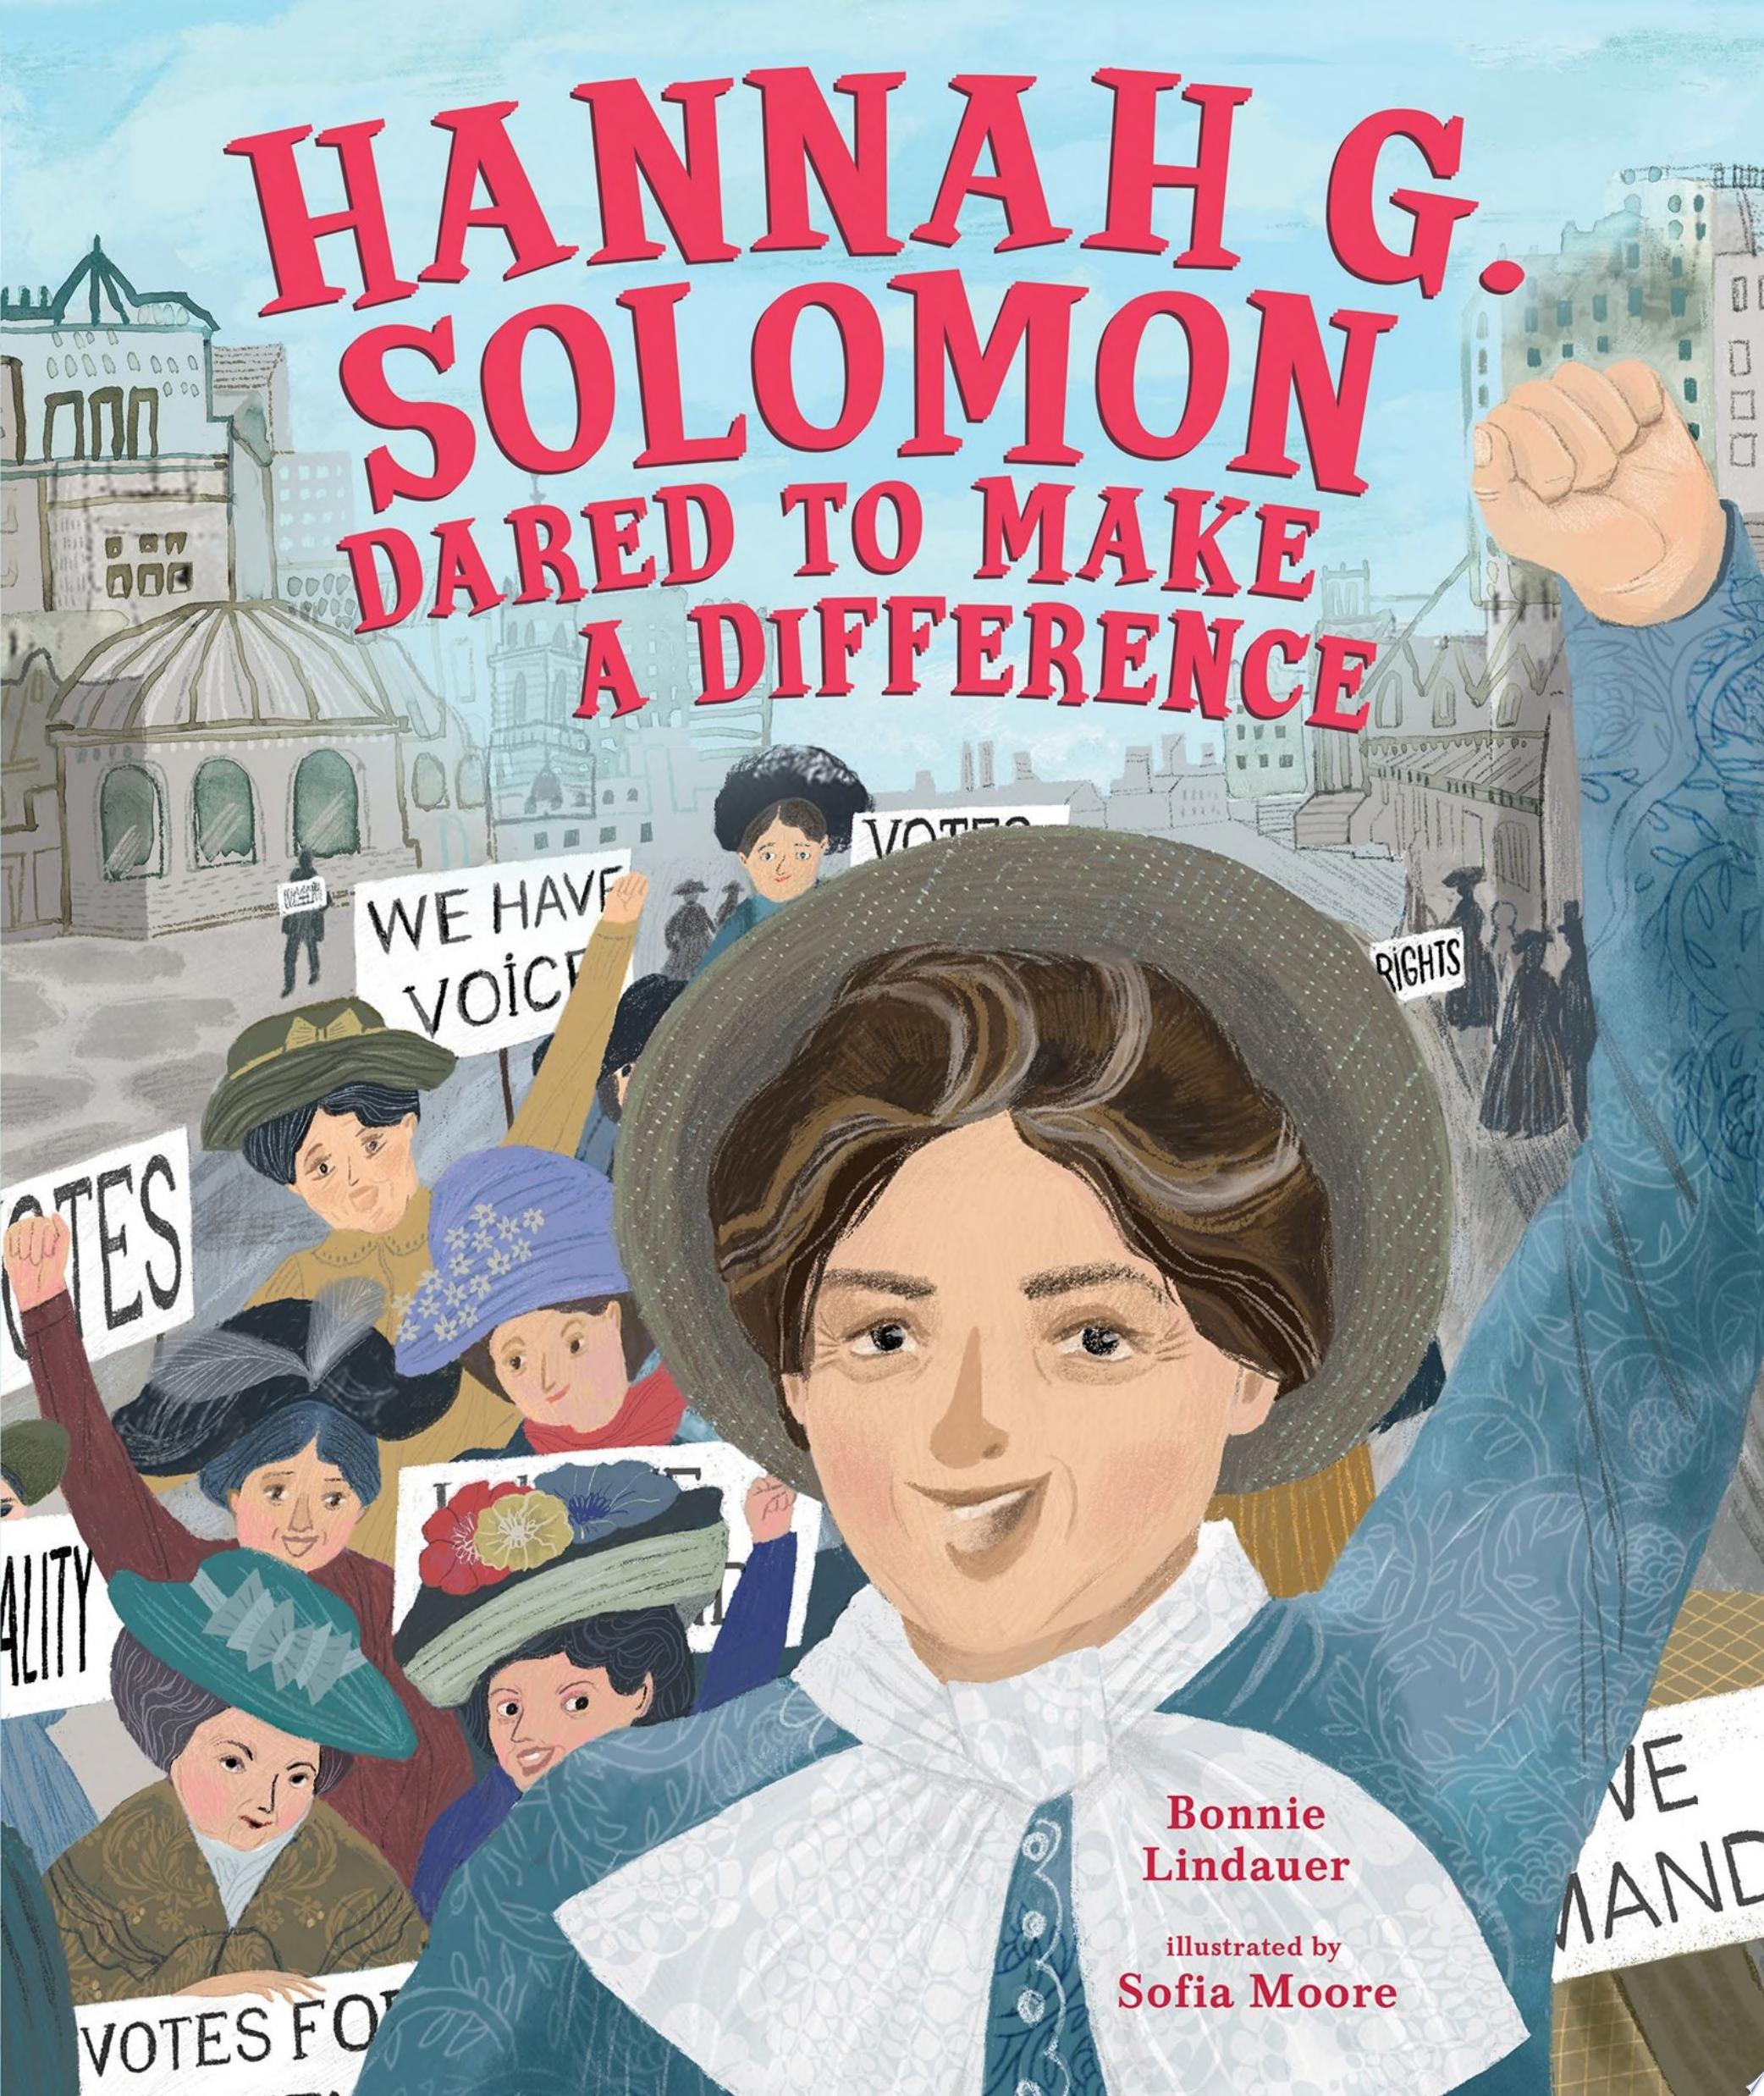 Image for "Hannah G. Solomon Dared to Make a Difference"